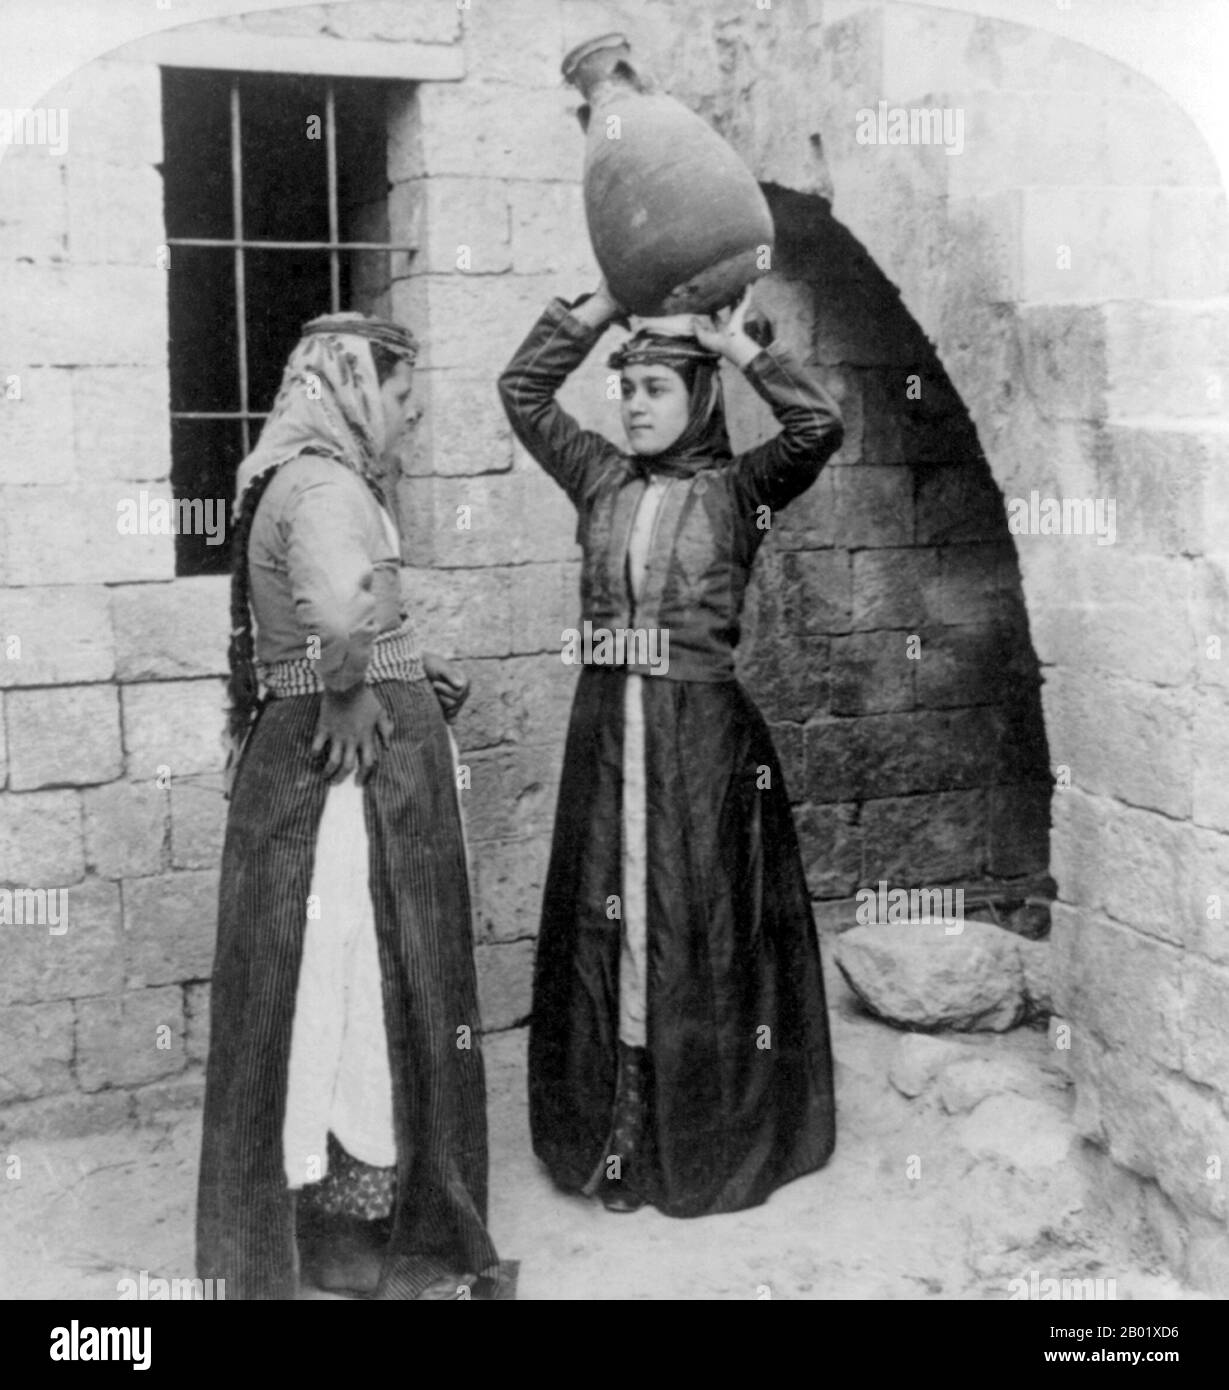 Palestine: Palestinian Christian girls of Nazareth, c. 1900.  Palestine is a name given to the geographic region between the Mediterranean Sea and the Jordan River. The region is also known as the Land of Israel, the Holy Land and the Southern Levant.  In 1832 Palestine was conquered by Muhammad Ali's Egypt, but in 1840 Britain intervened and returned control of the Levant to the Ottomans in return for further capitulations. The end of the 19th century saw the beginning of Zionist immigration and the Revival of the Hebrew language. Stock Photo